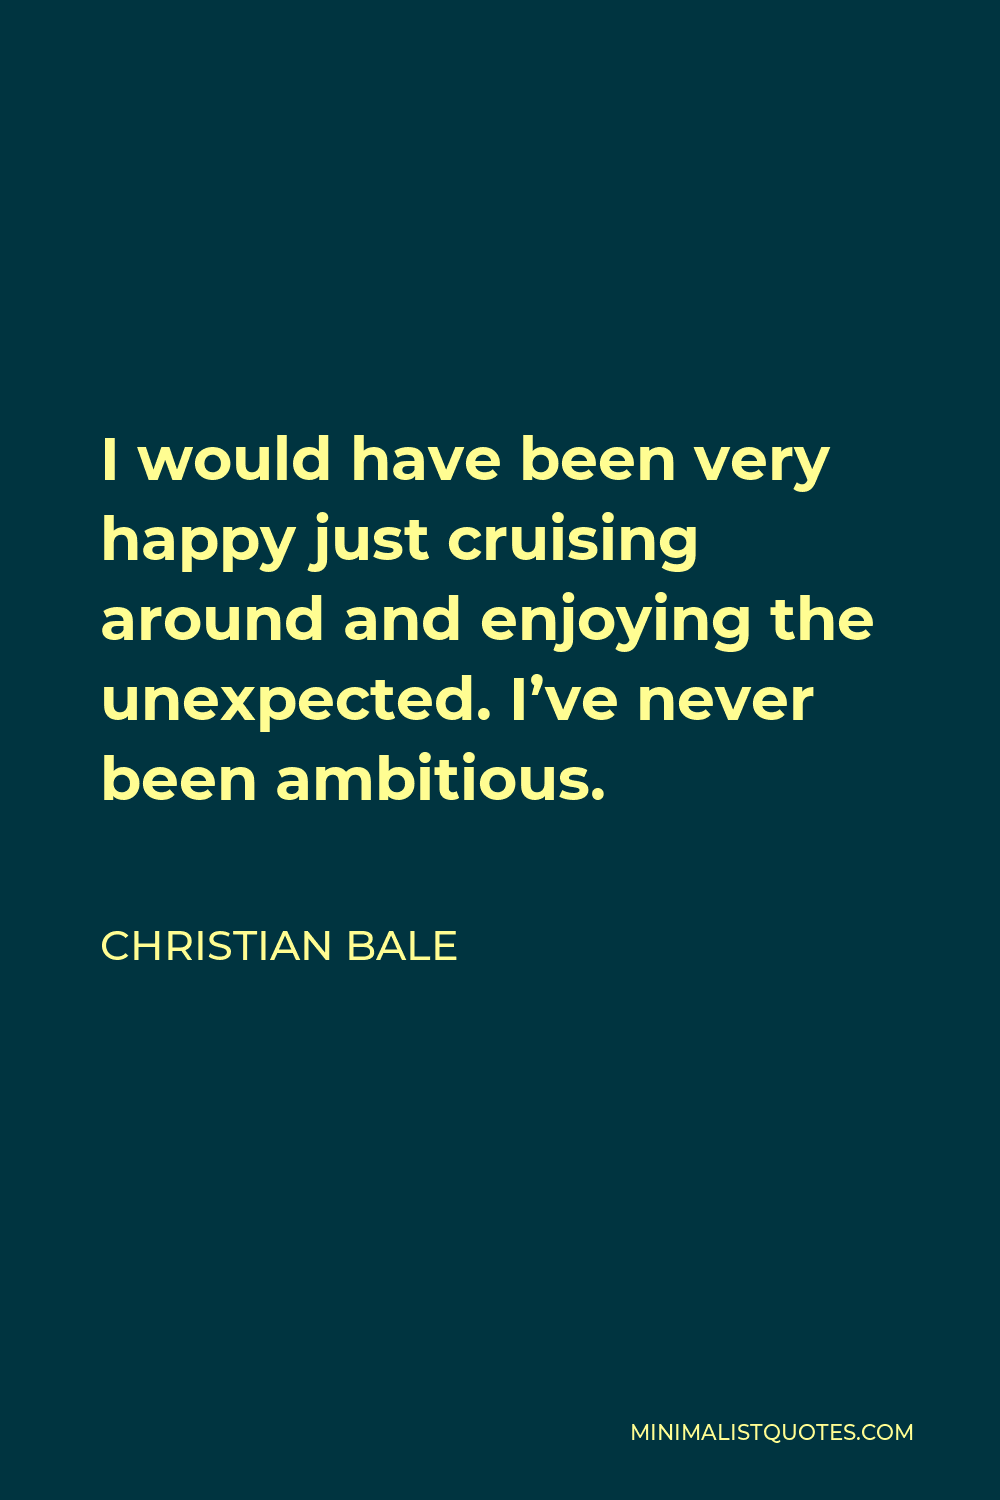 Christian Bale Quote - I would have been very happy just cruising around and enjoying the unexpected. I’ve never been ambitious.